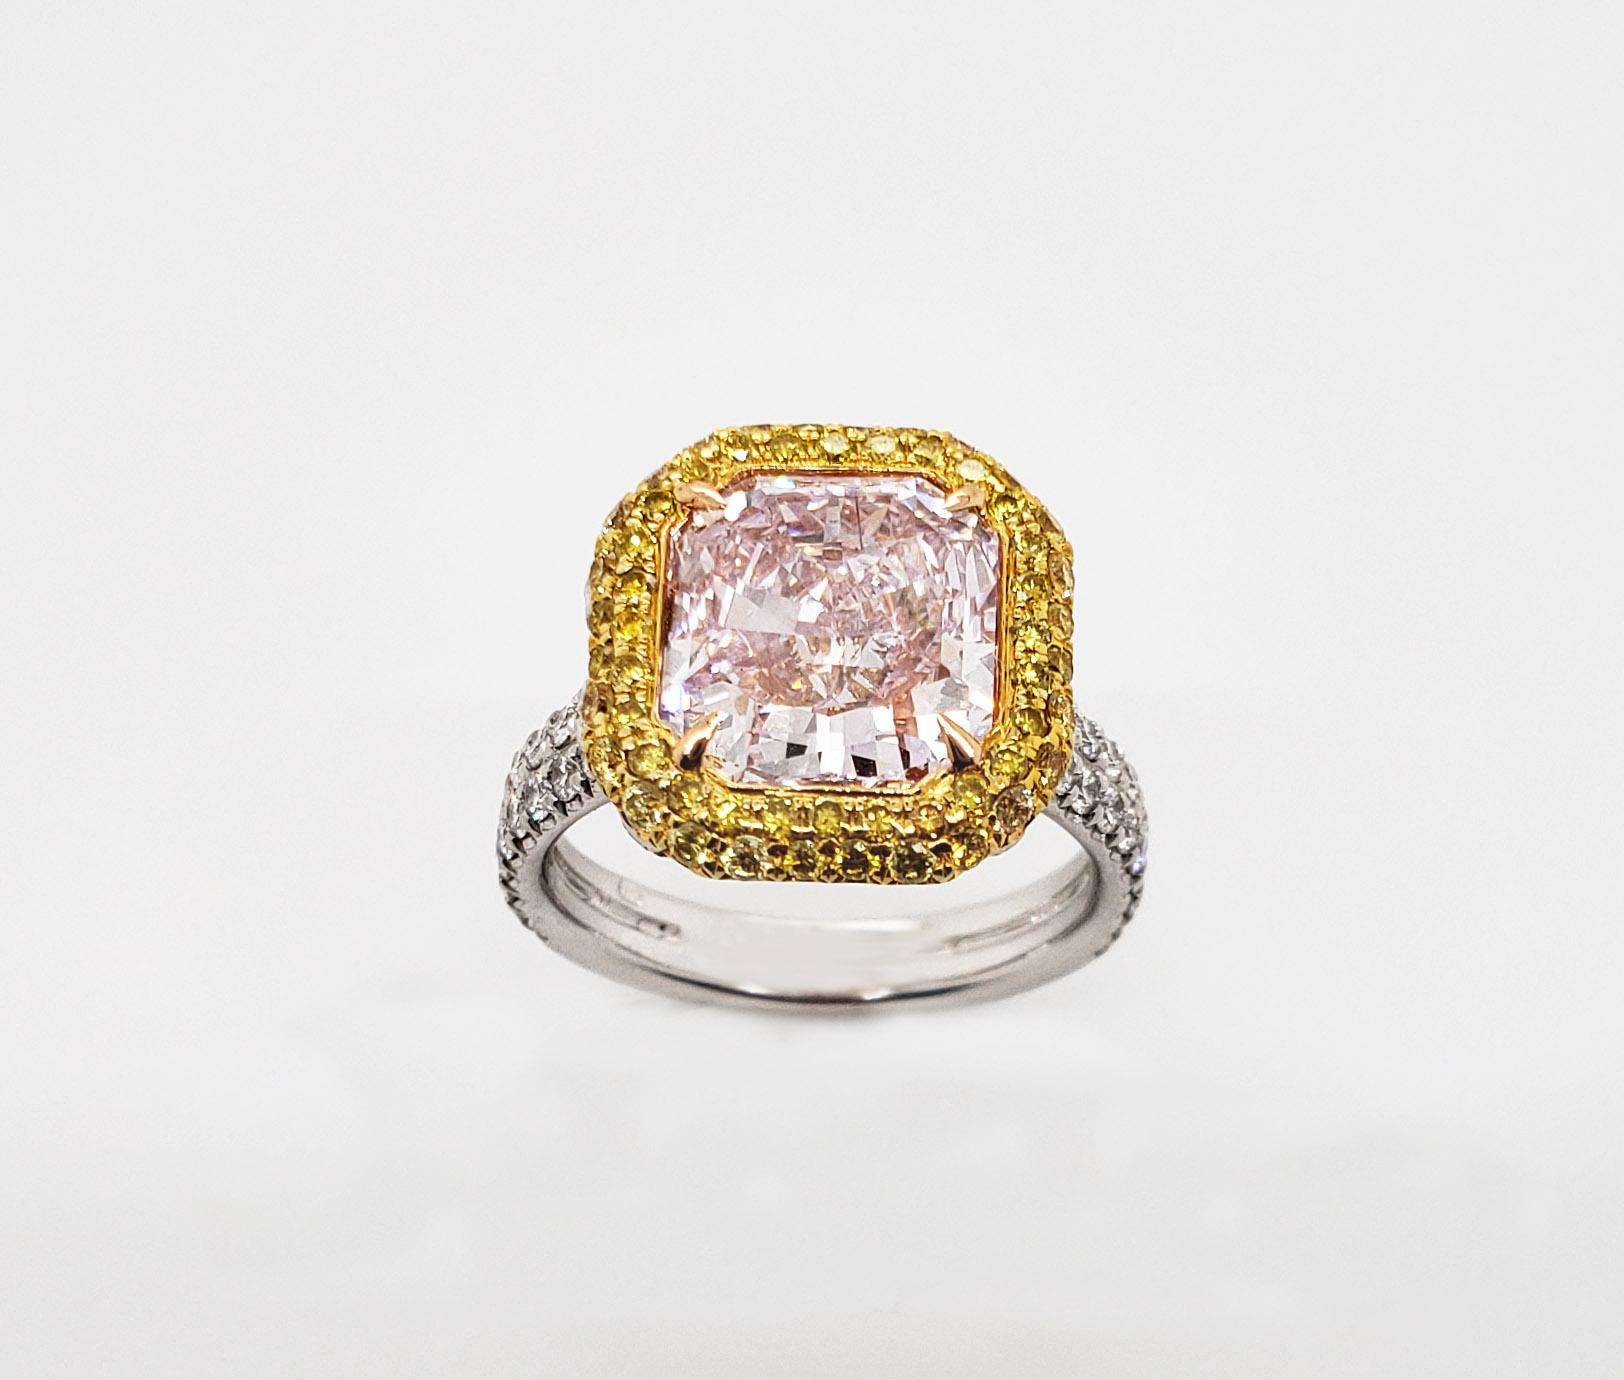 From SCARSELLI this Natural Fancy Light Pinkish Purple Radiant diamond of 4 carats, VVS1 clarity certified by GIA (see certificate picture for detailed stone information) mounted with two rows of round yellow diamonds.  

Inquiries are encouraged.